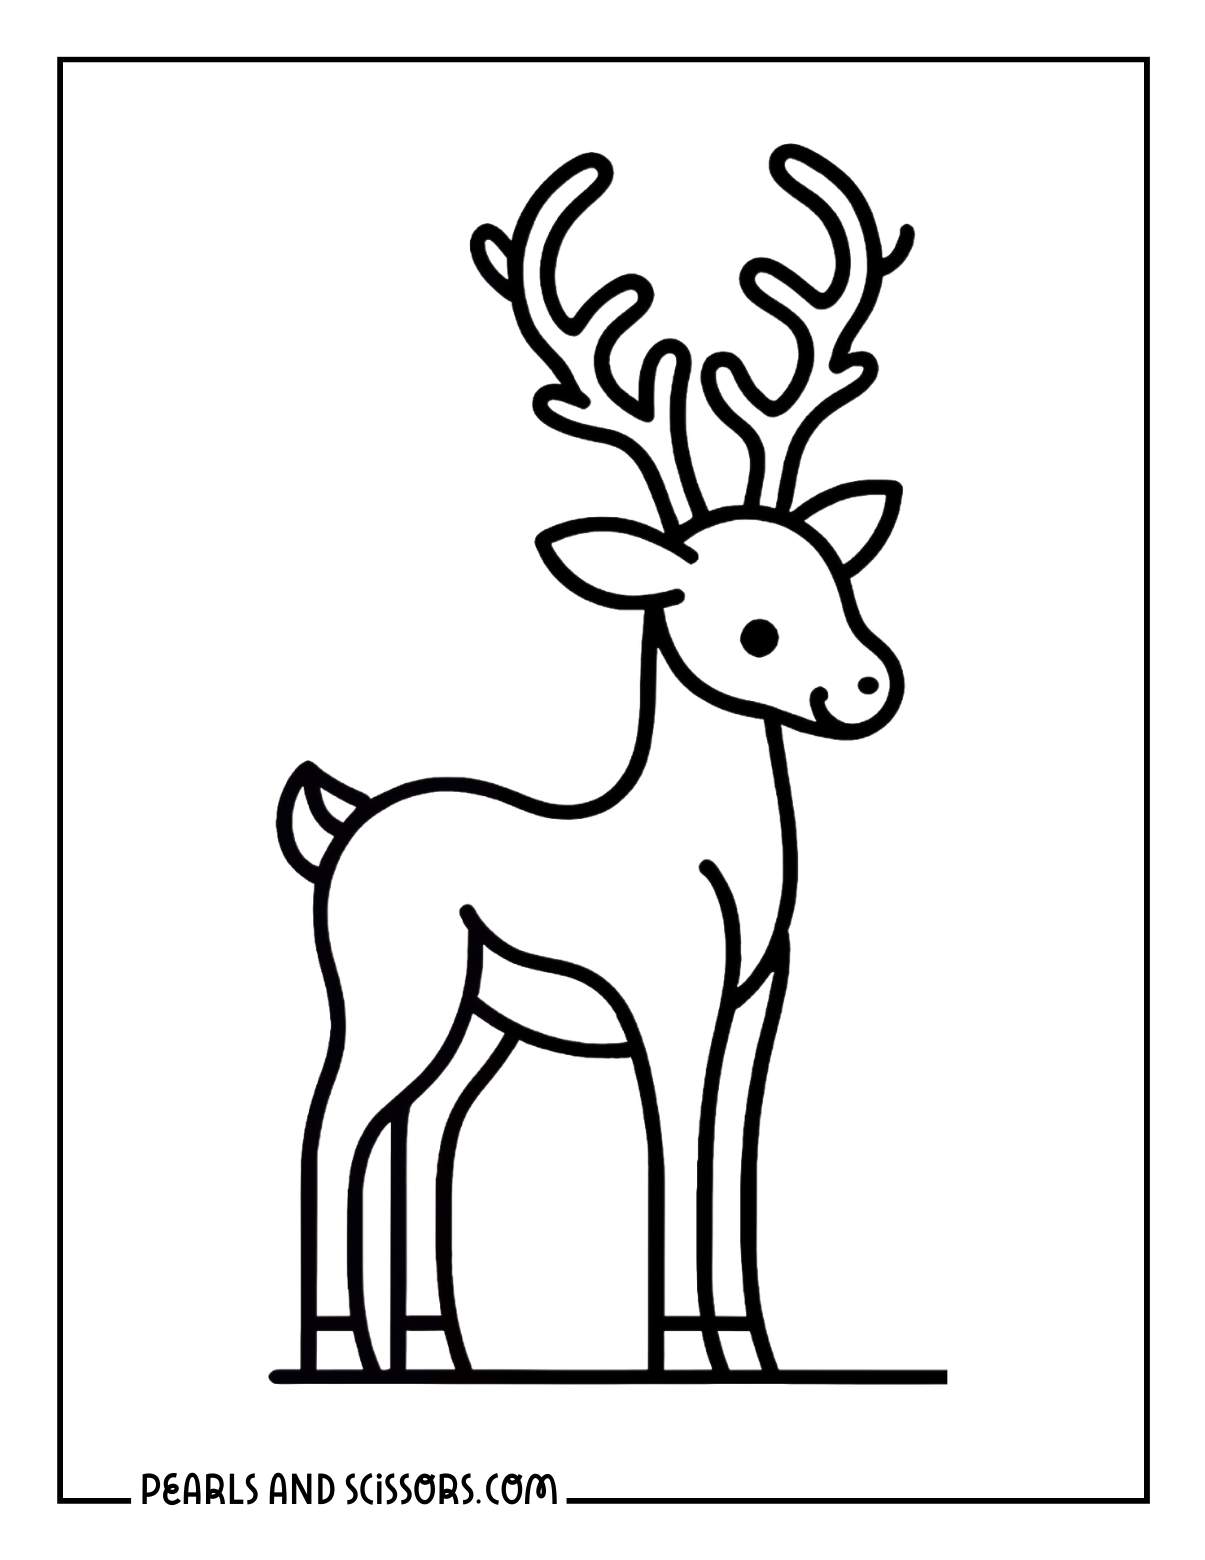 Easy reindeer outline christmas coloring page for kids.